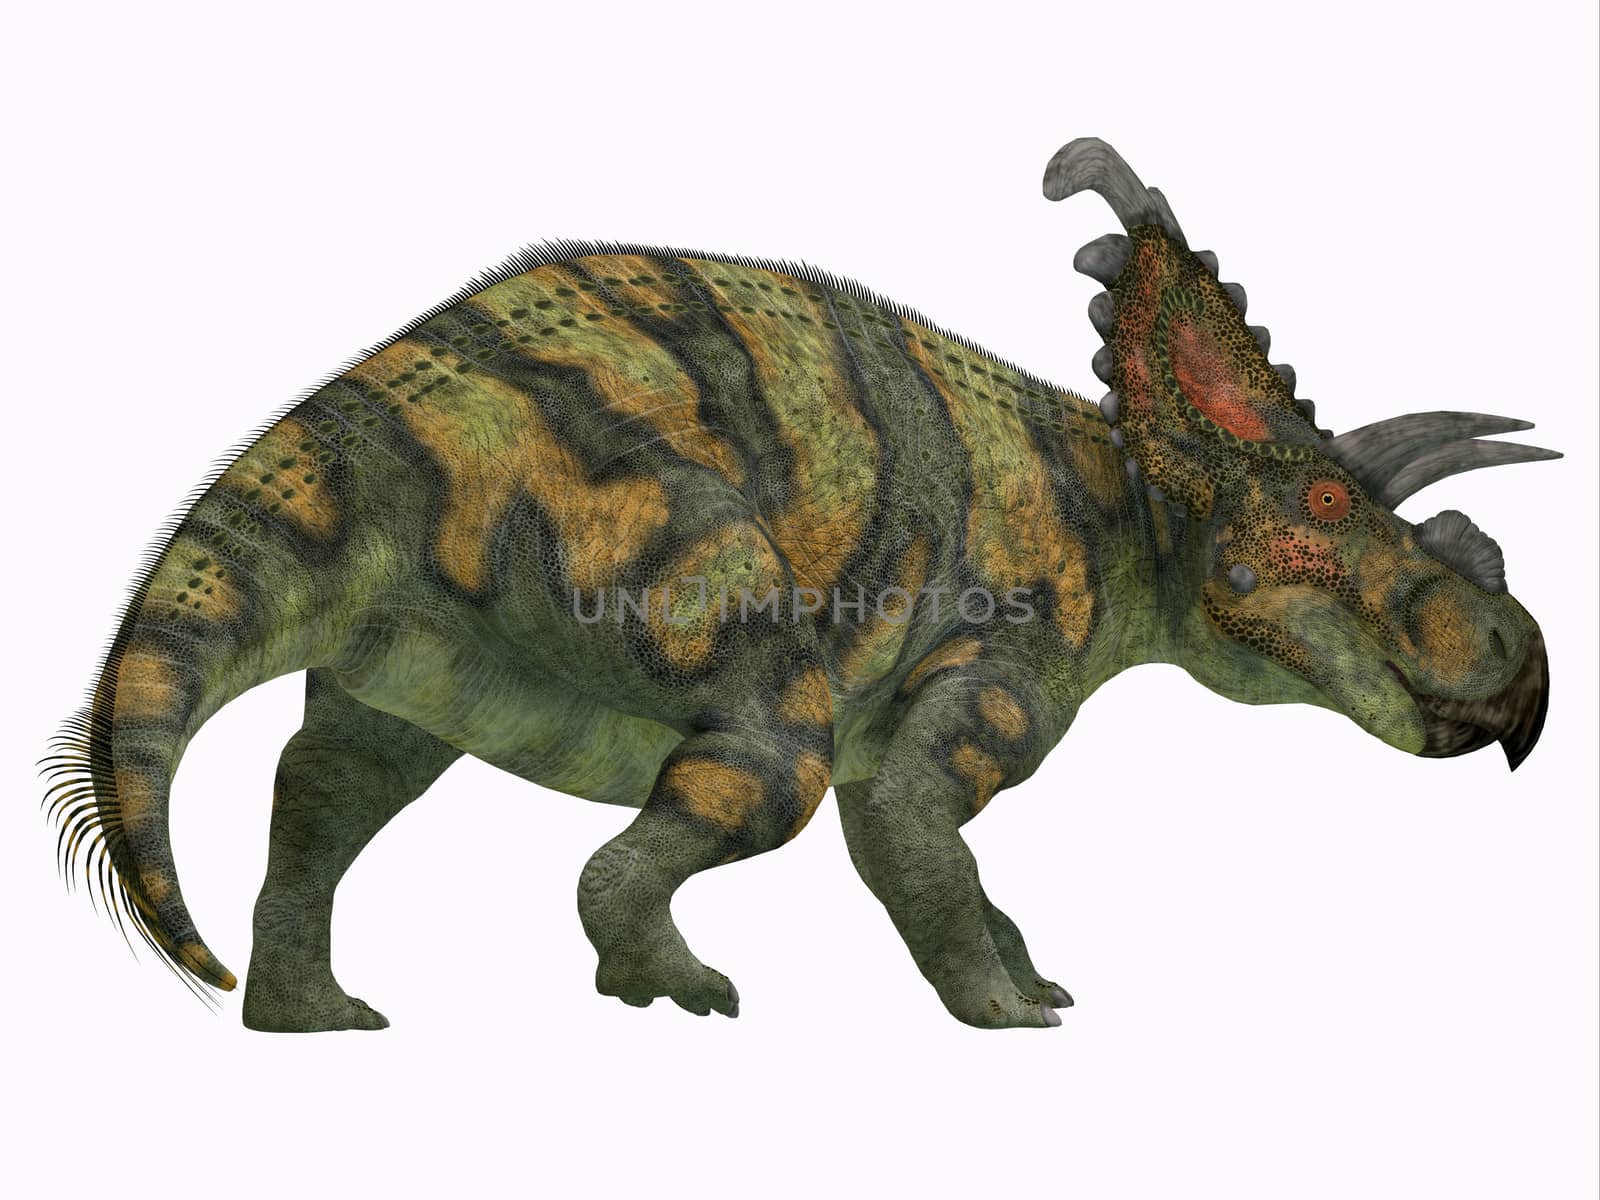 Albertaceratops was a herbivorous Ceratopsian dinosaur that lived in Alberta, Canada in the Cretaceous Period.